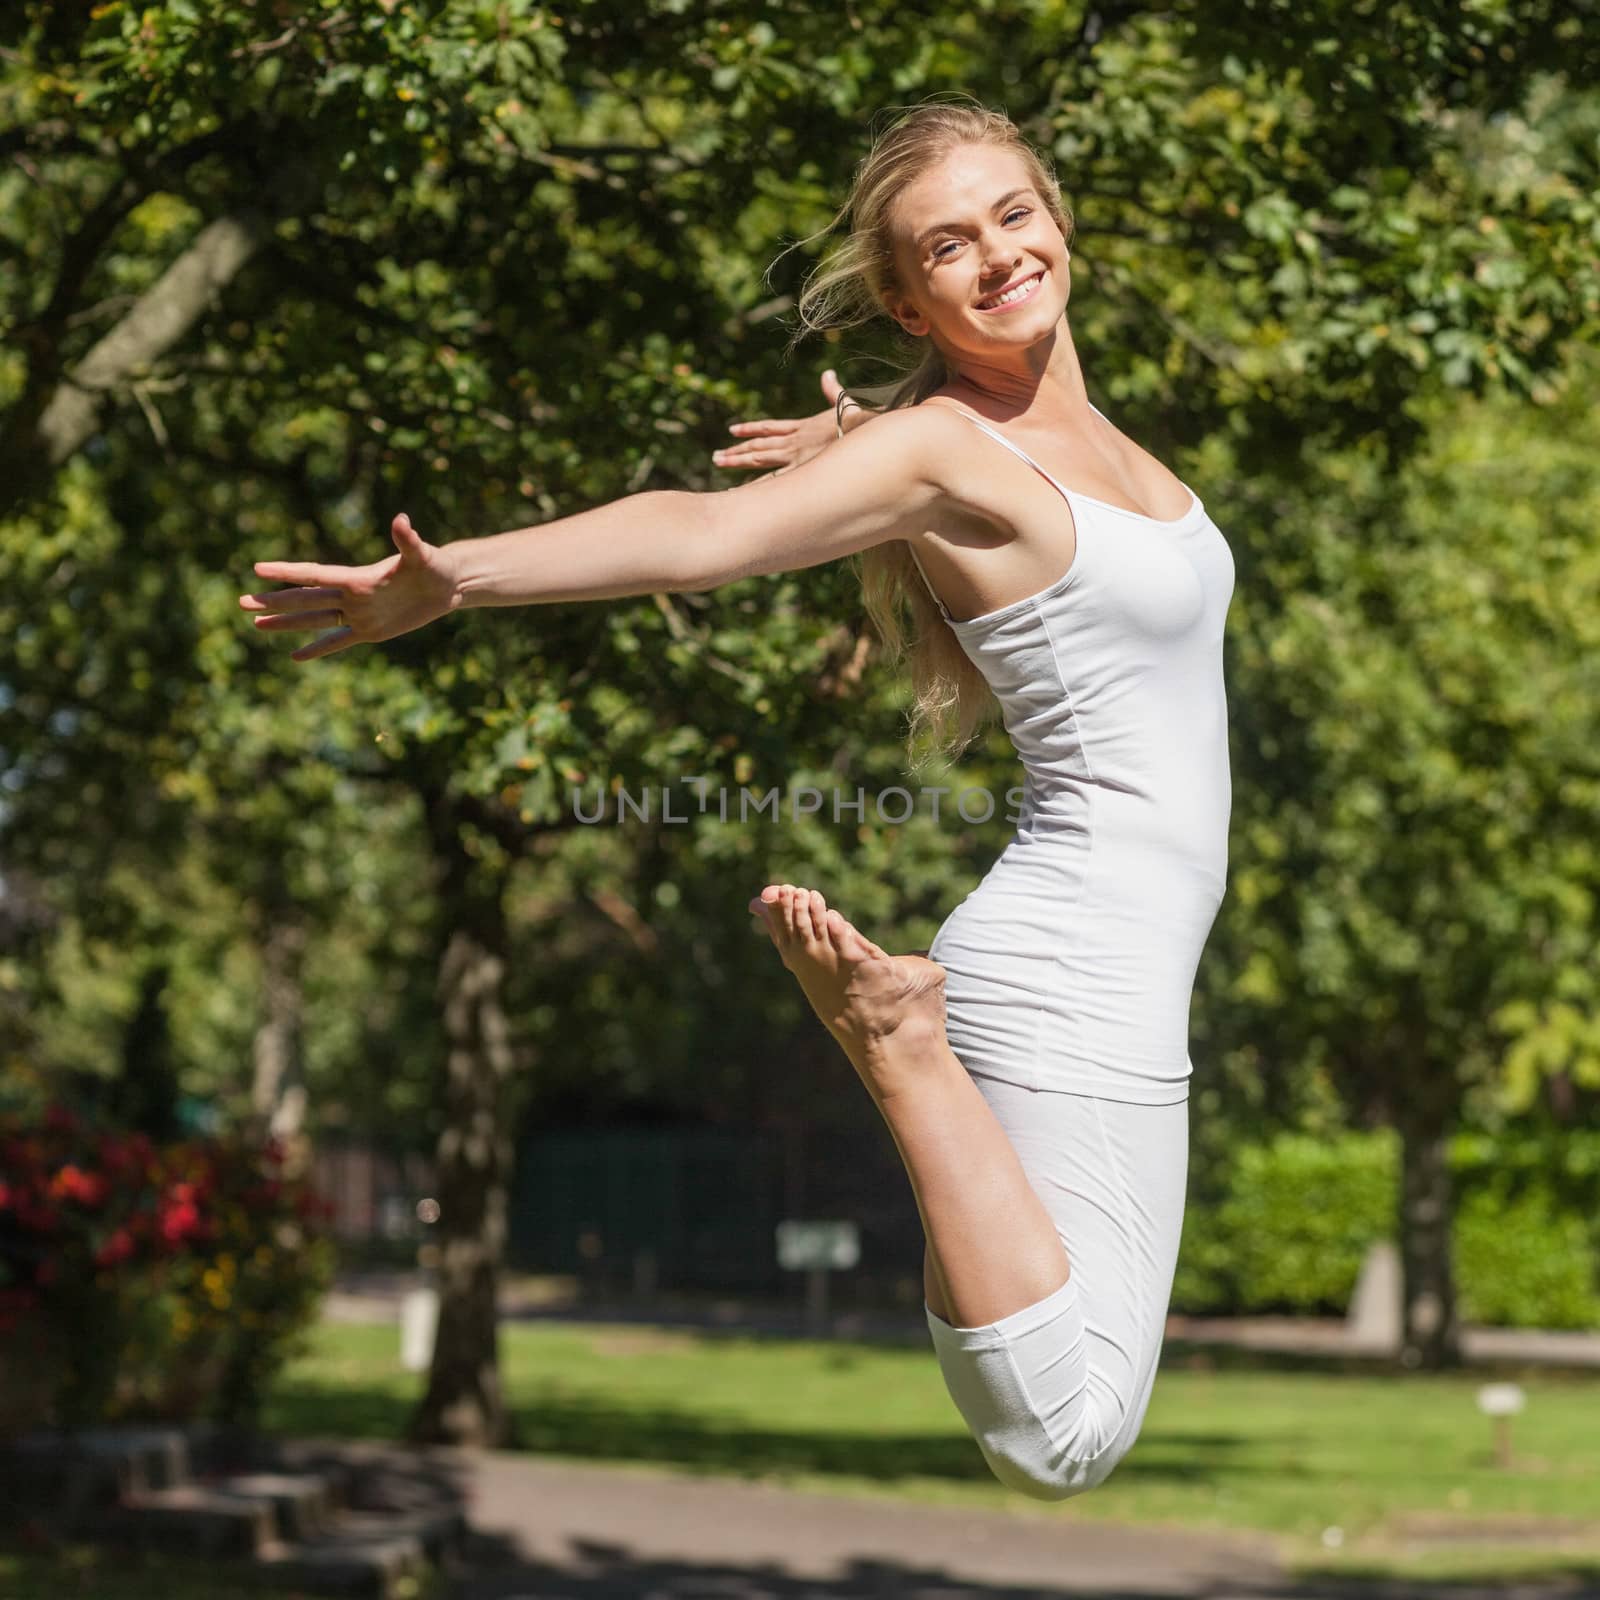 Side view of young fit woman jumping spreading her arms in a park